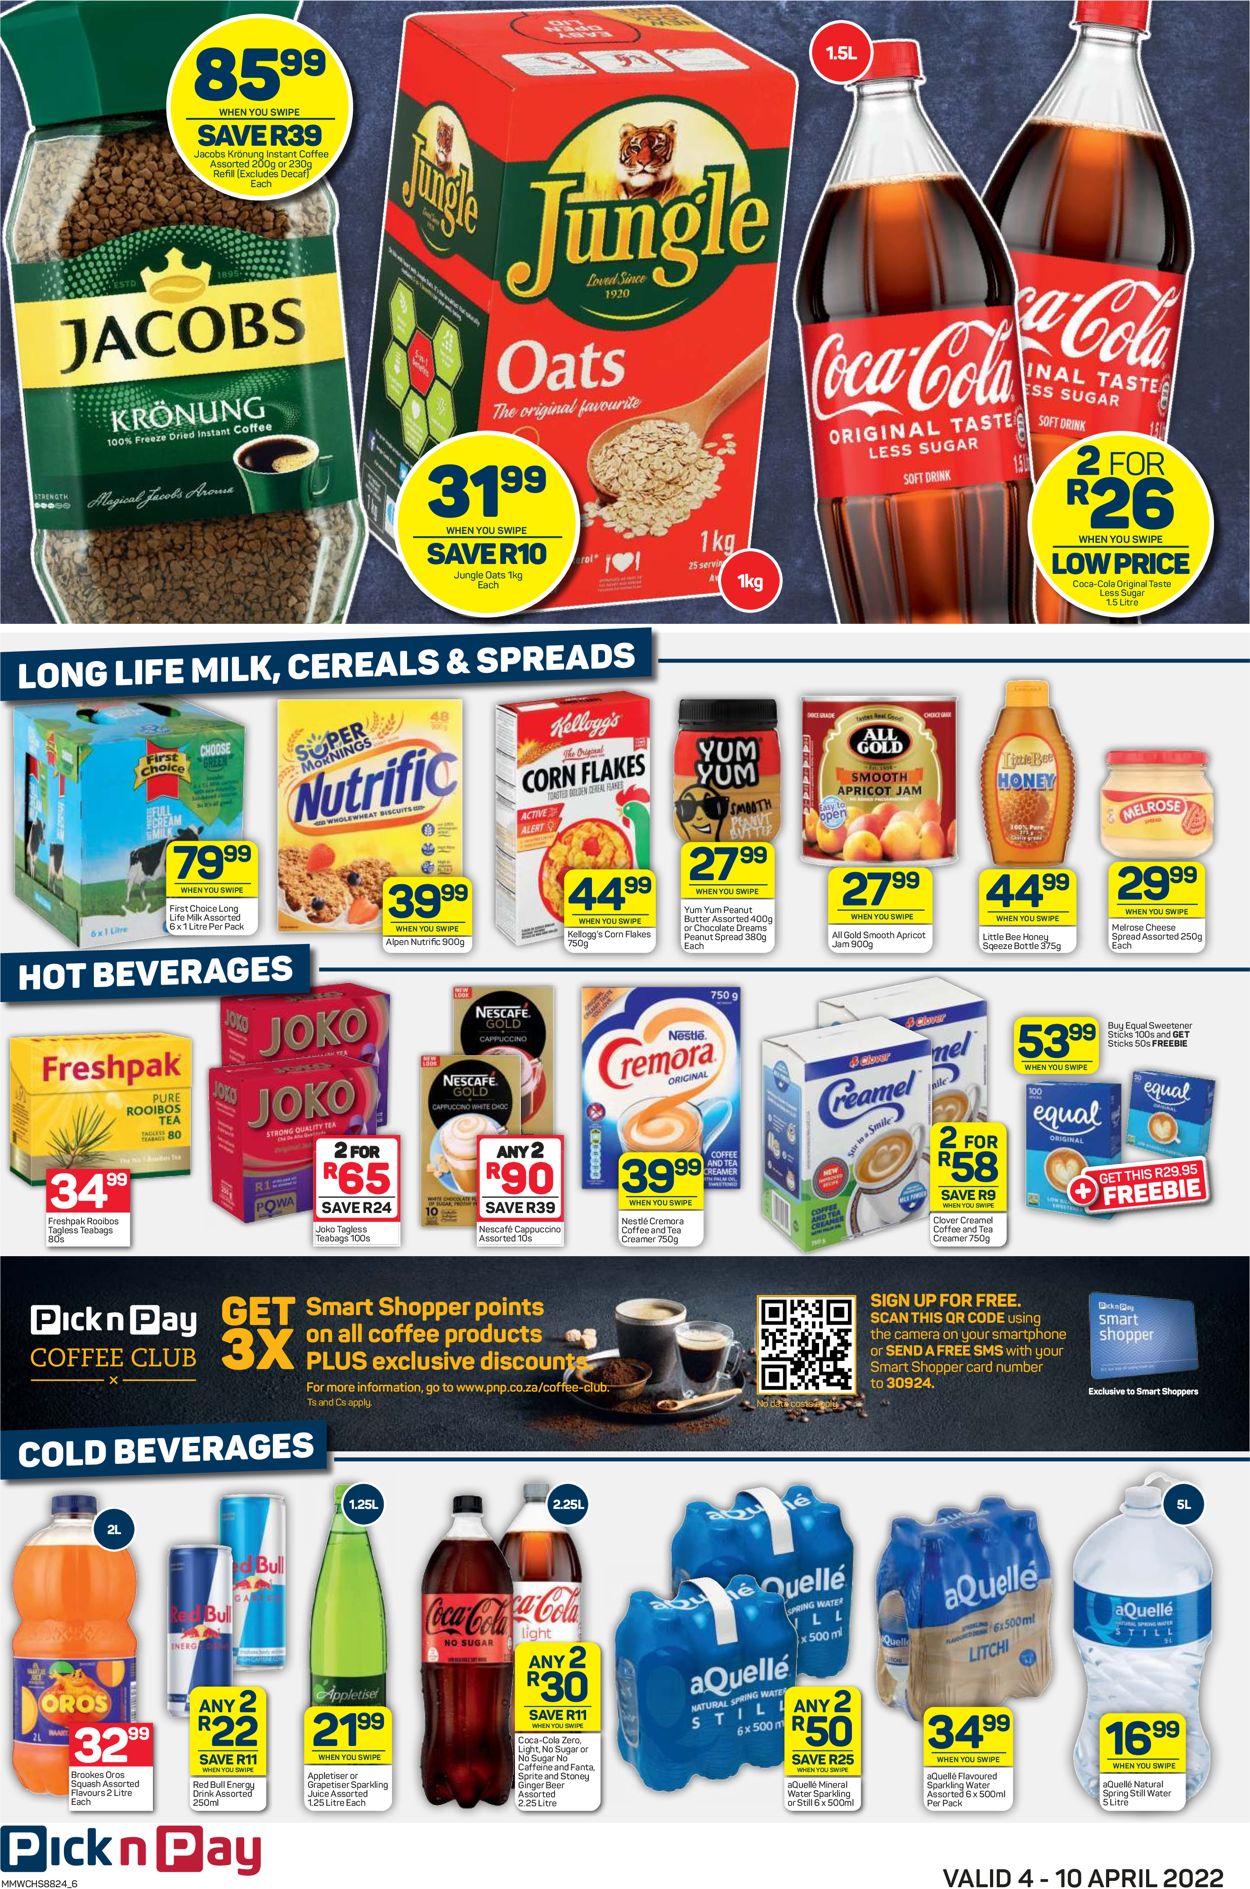 Pick n Pay EASTER 2022 Catalogue - 2022/04/04-2022/04/10 (Page 7)